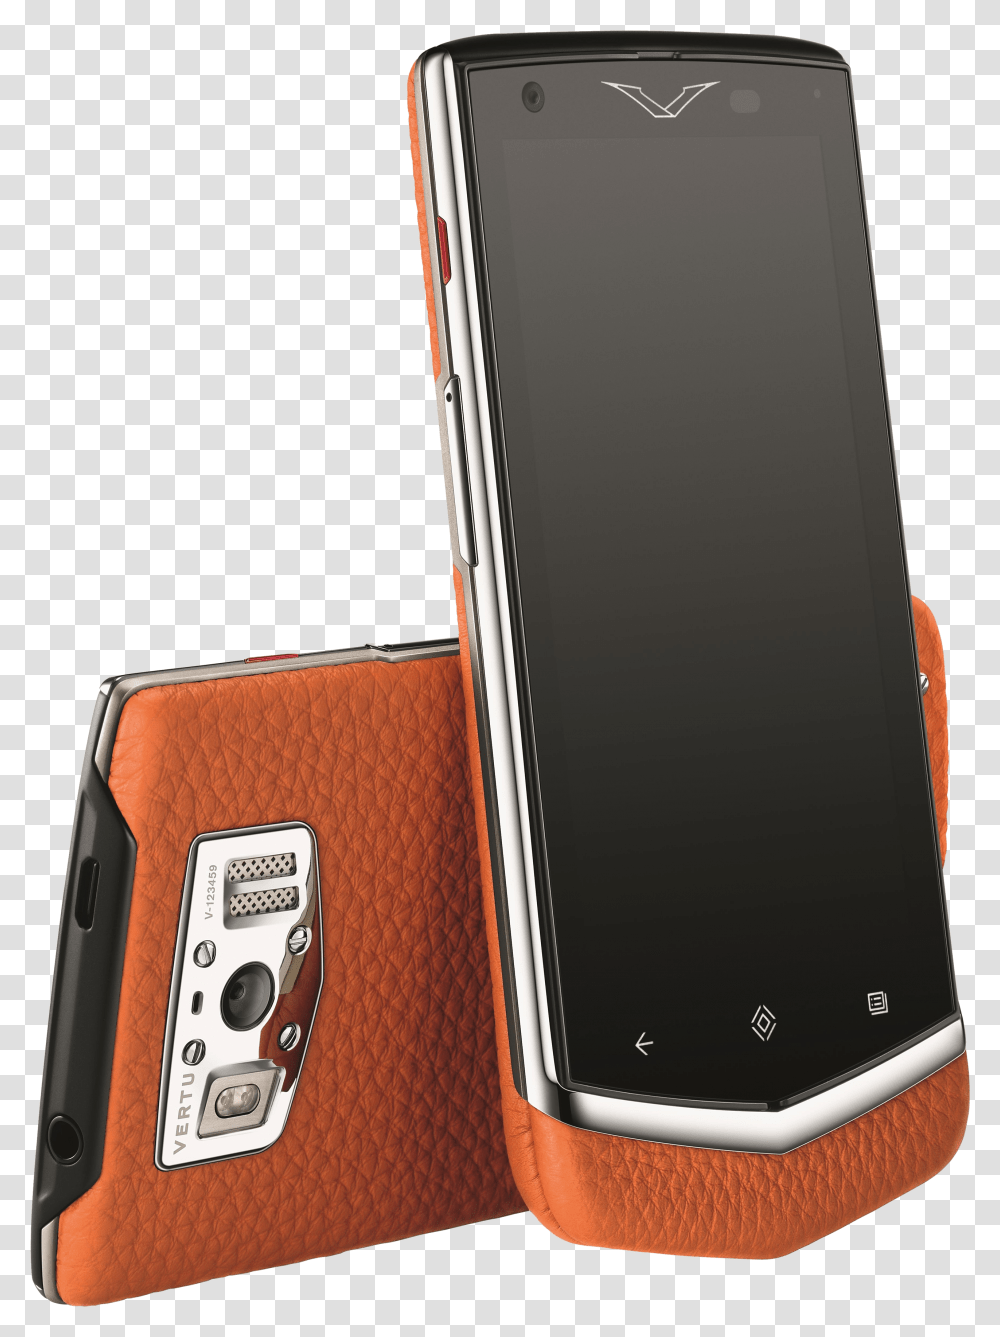 Android Smartphone Image Sony Mobile Phones Phone Accessories Image Transparent Png